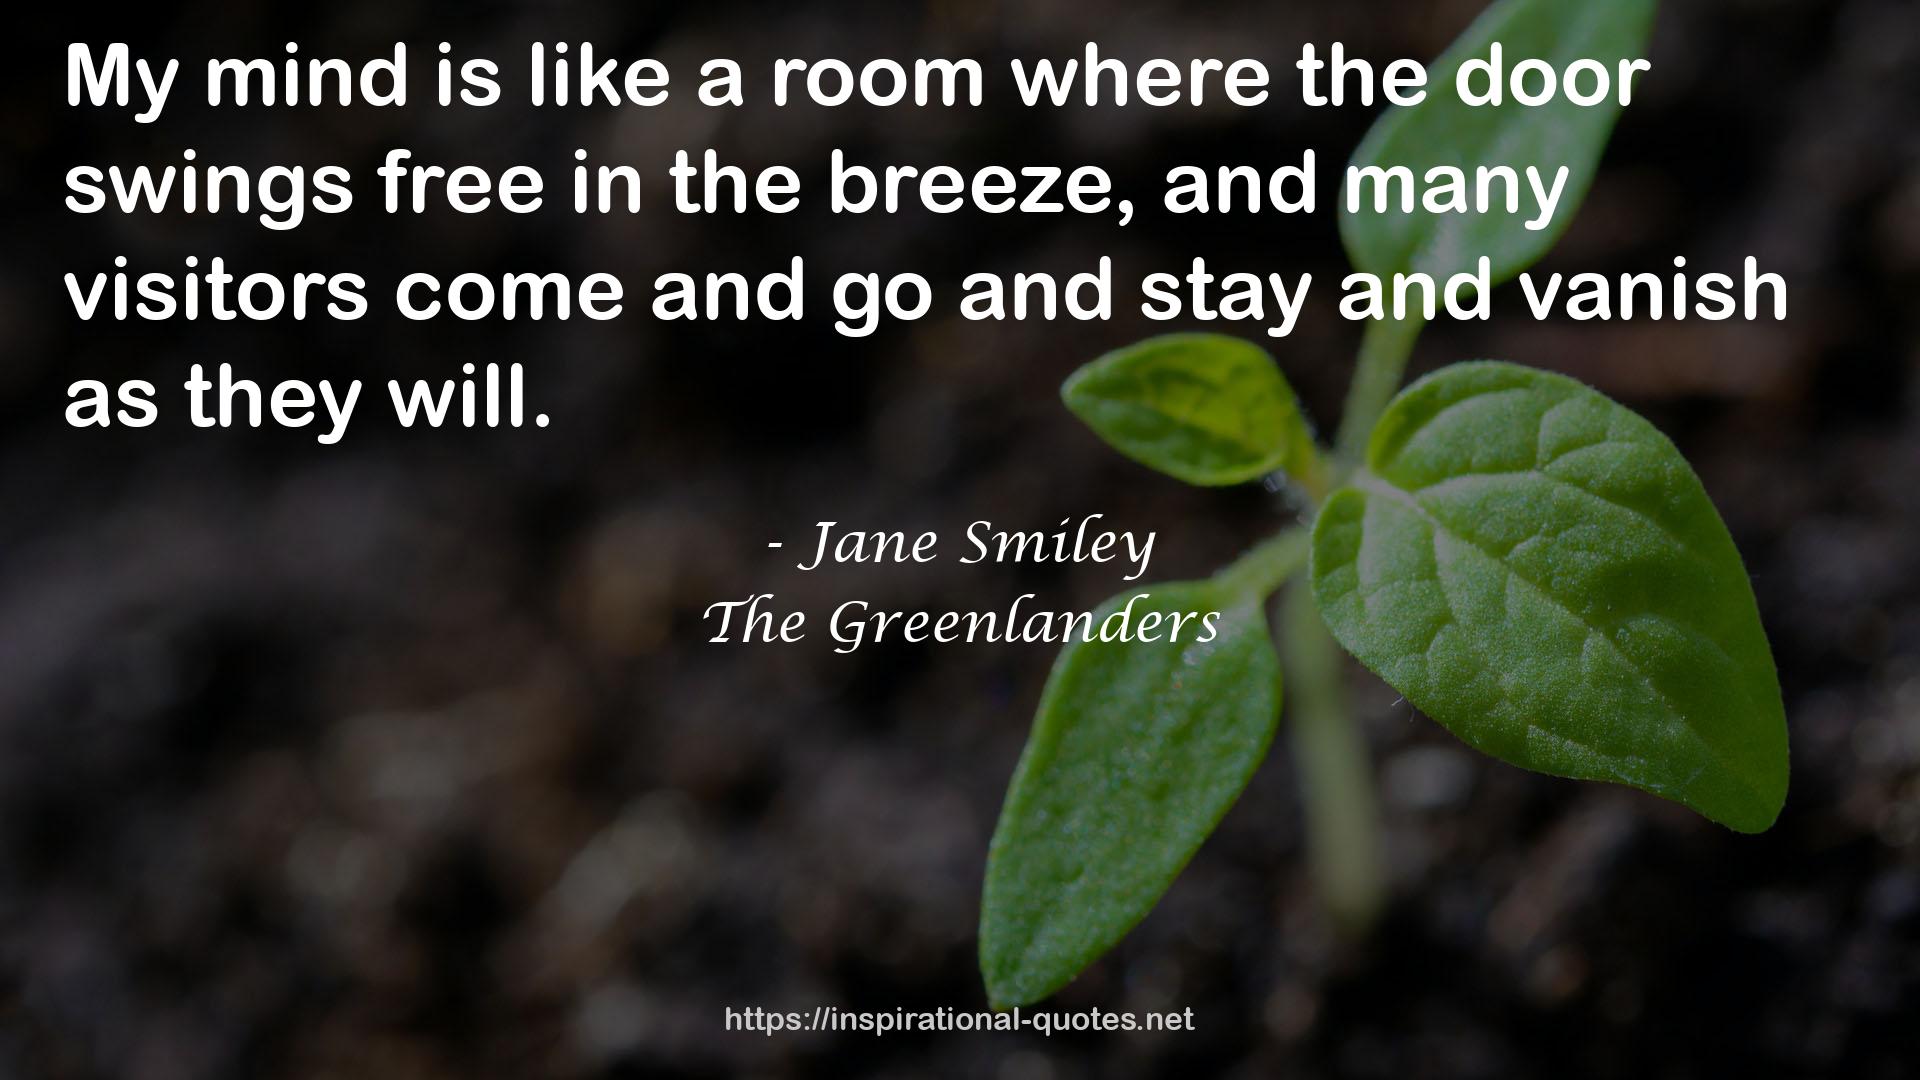 The Greenlanders QUOTES